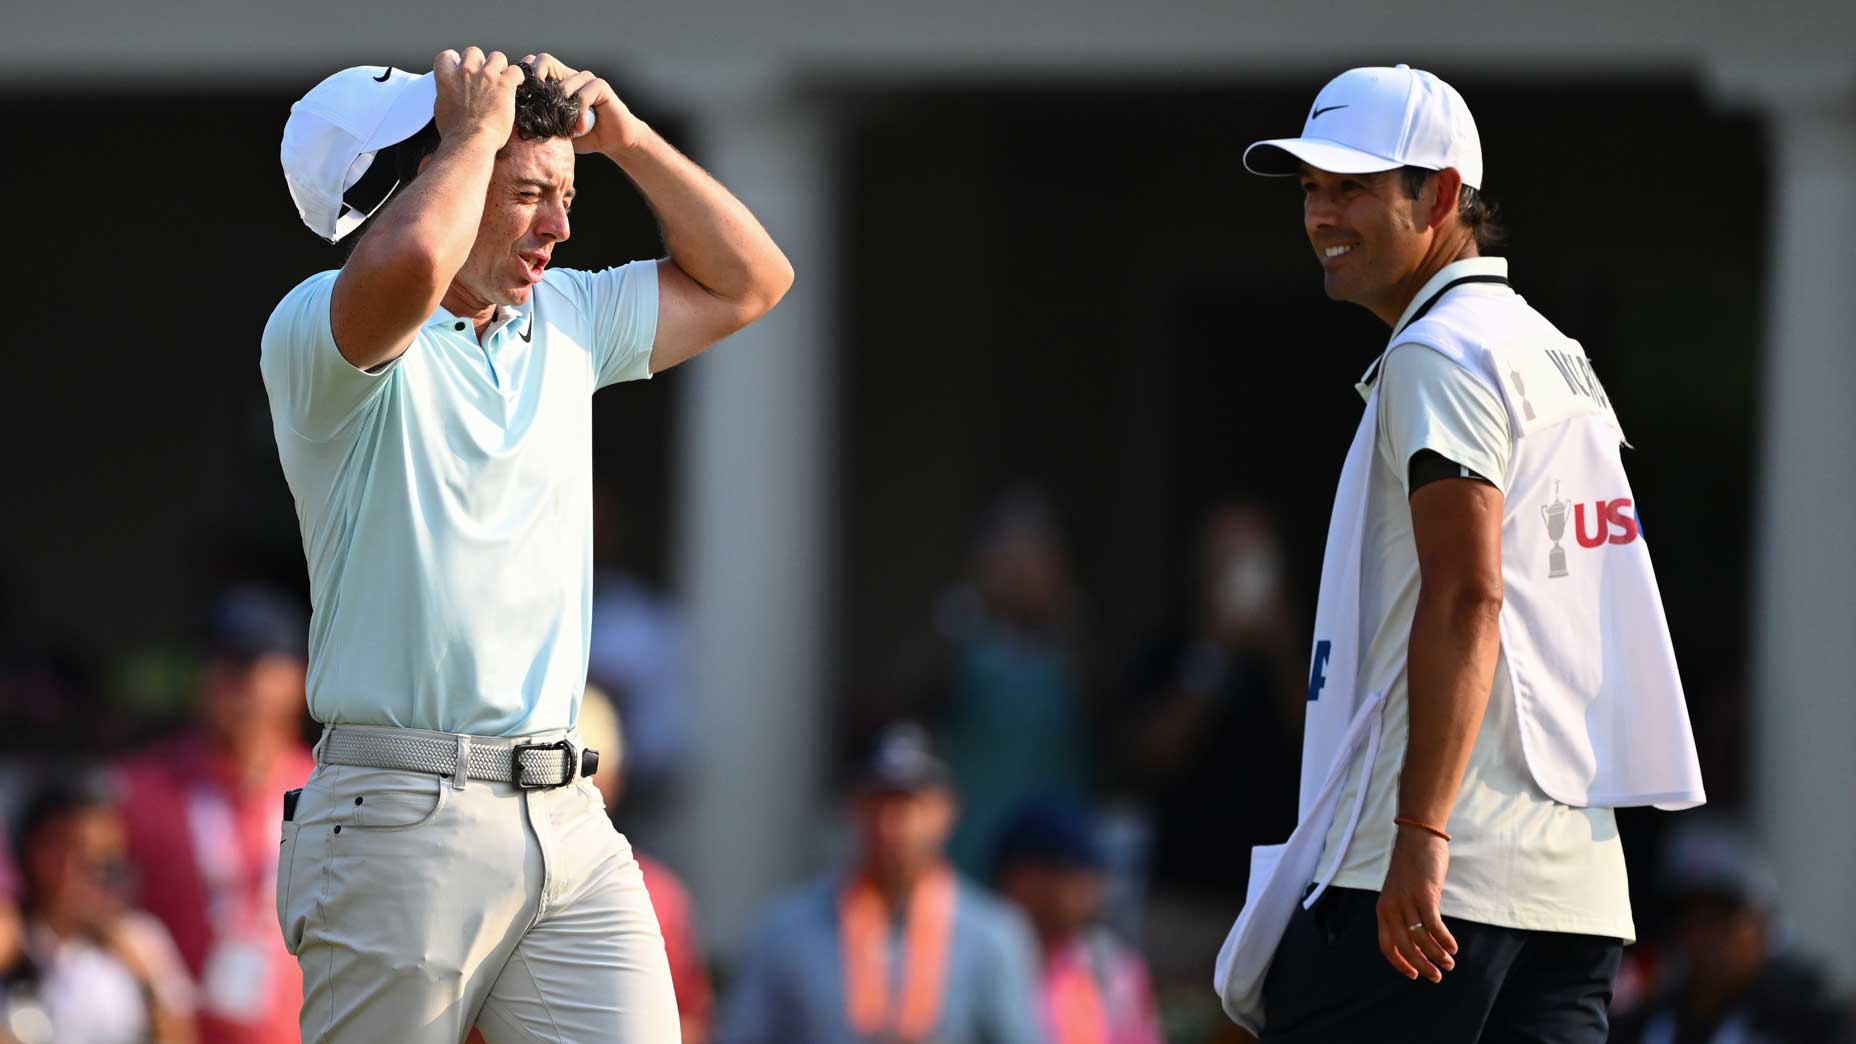 Rory McIlroy grabs his head after missing short putt on 18 to lose 2024 U.S. Open